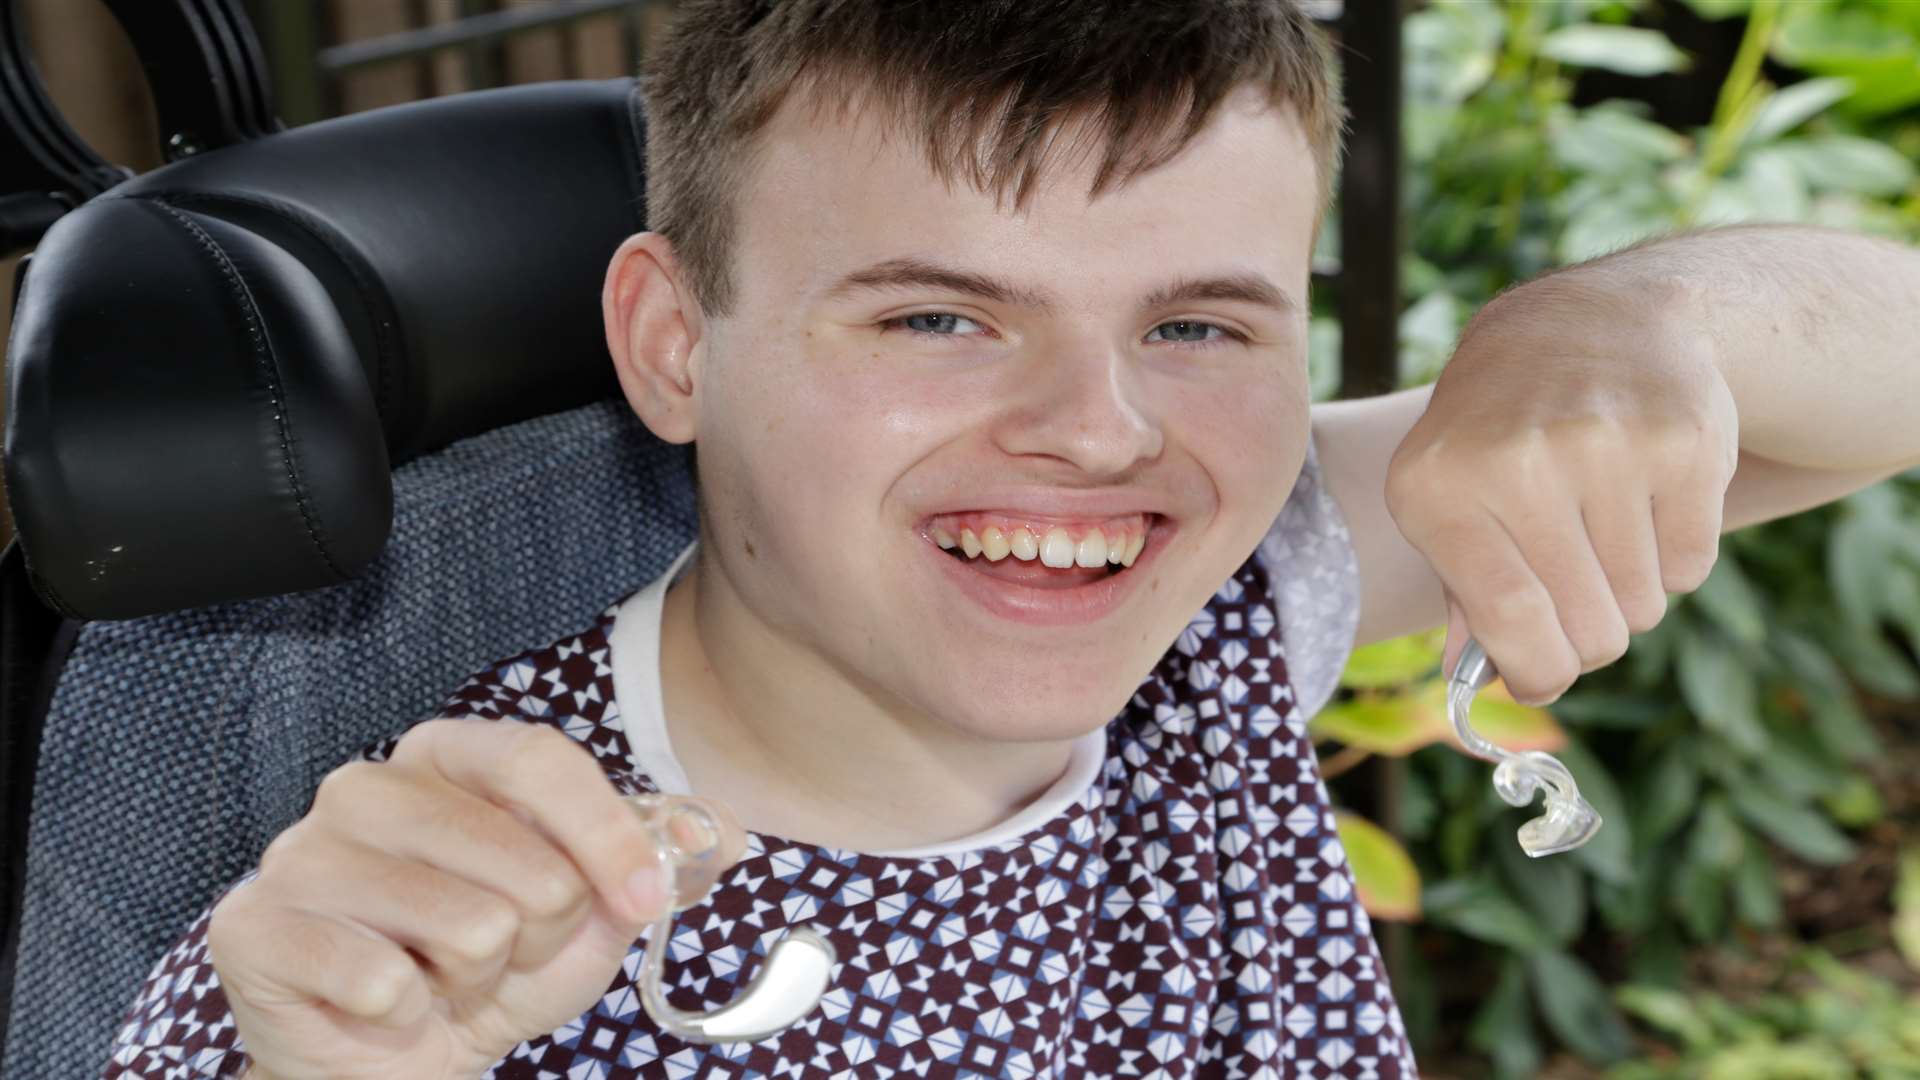 George Broadhurst, who was born premature at 27 weeks, has overcome many challenges and taken his qualification in statistical maths and core science a year early.